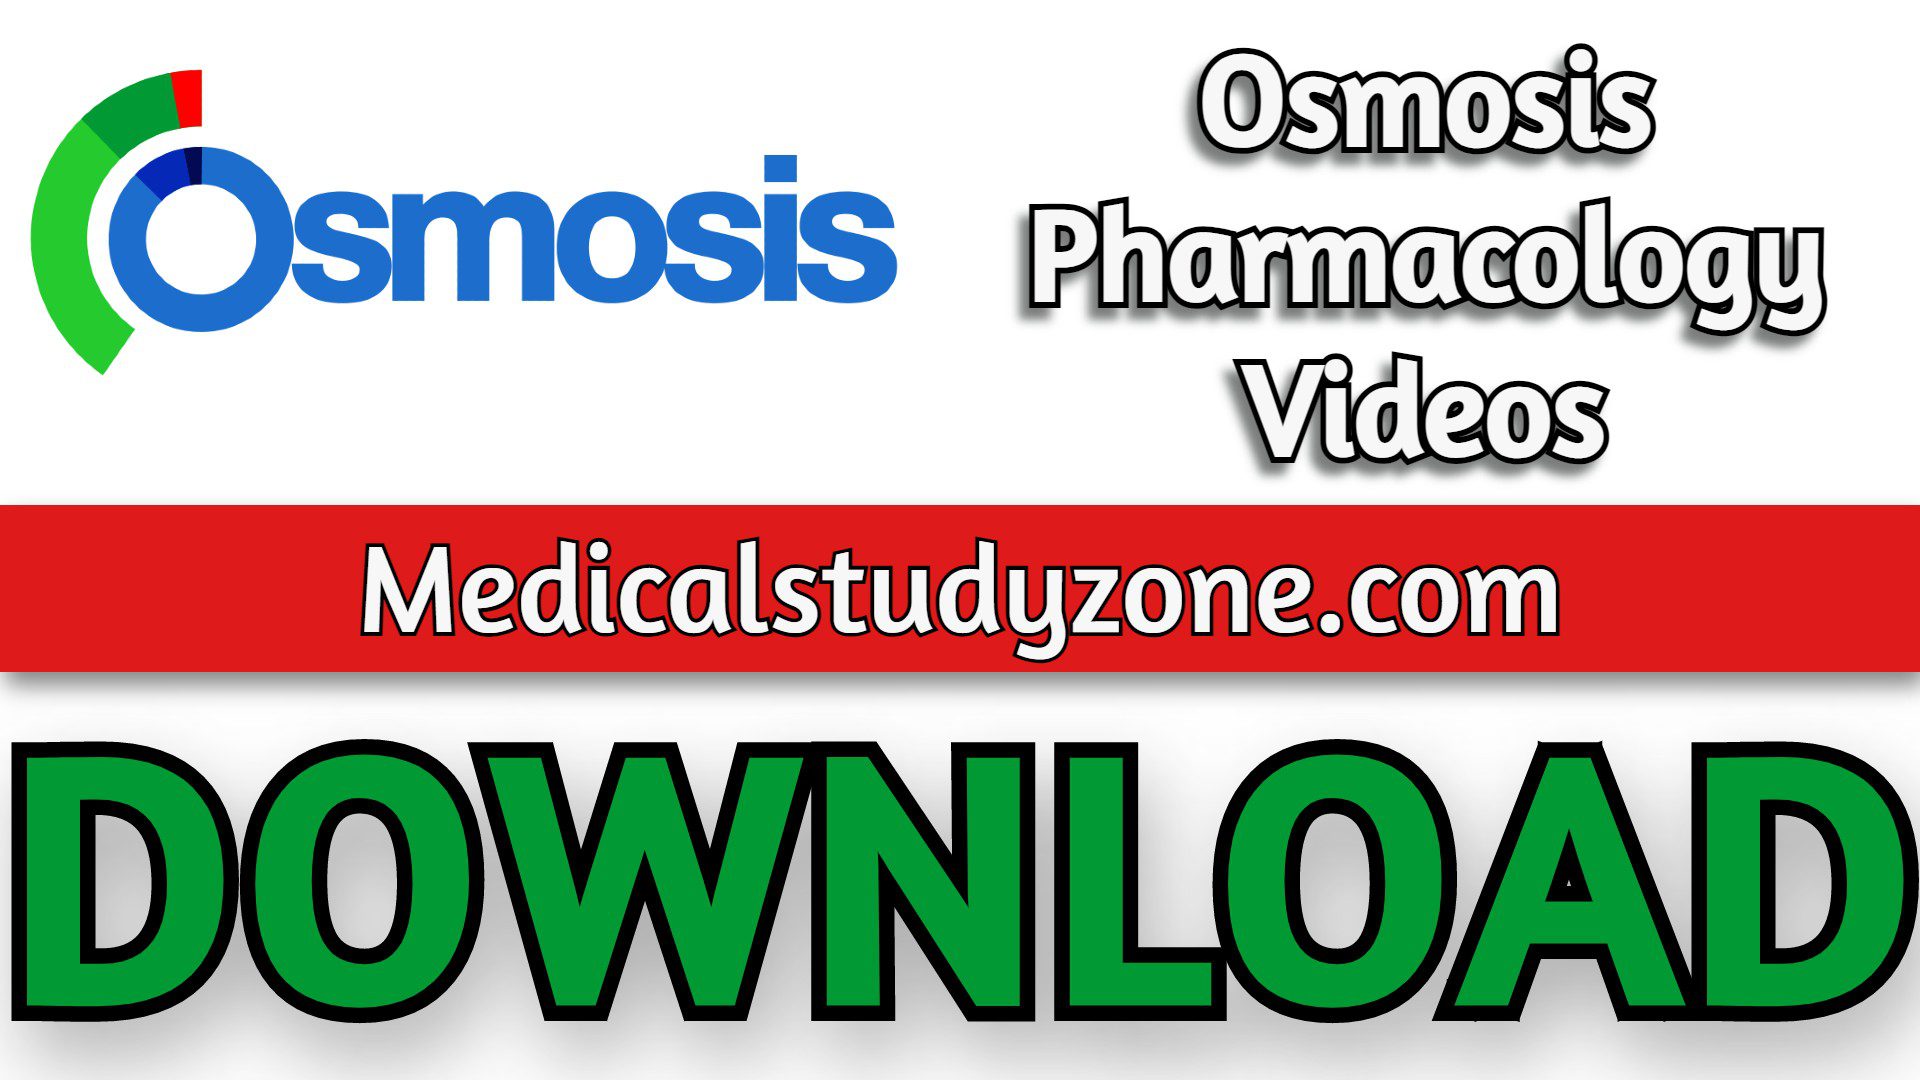 Osmosis Pharmacology Videos 2022 Free Download